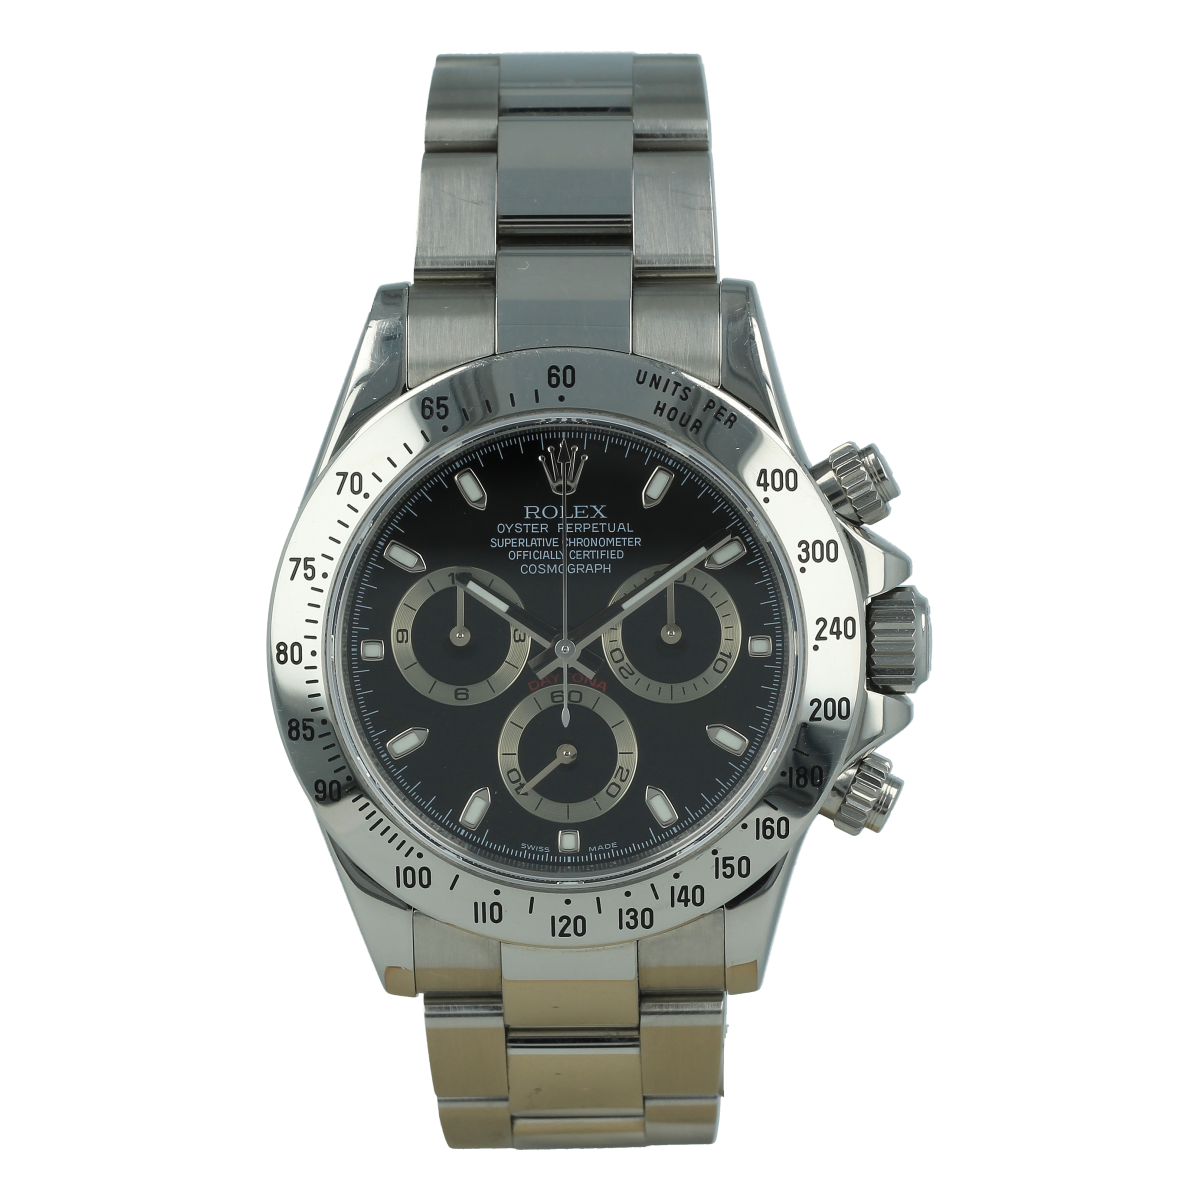 Rolex Cosmograph Daytona 116520 Black Dial  Unpolished* | Buy pre-owned Rolex watch